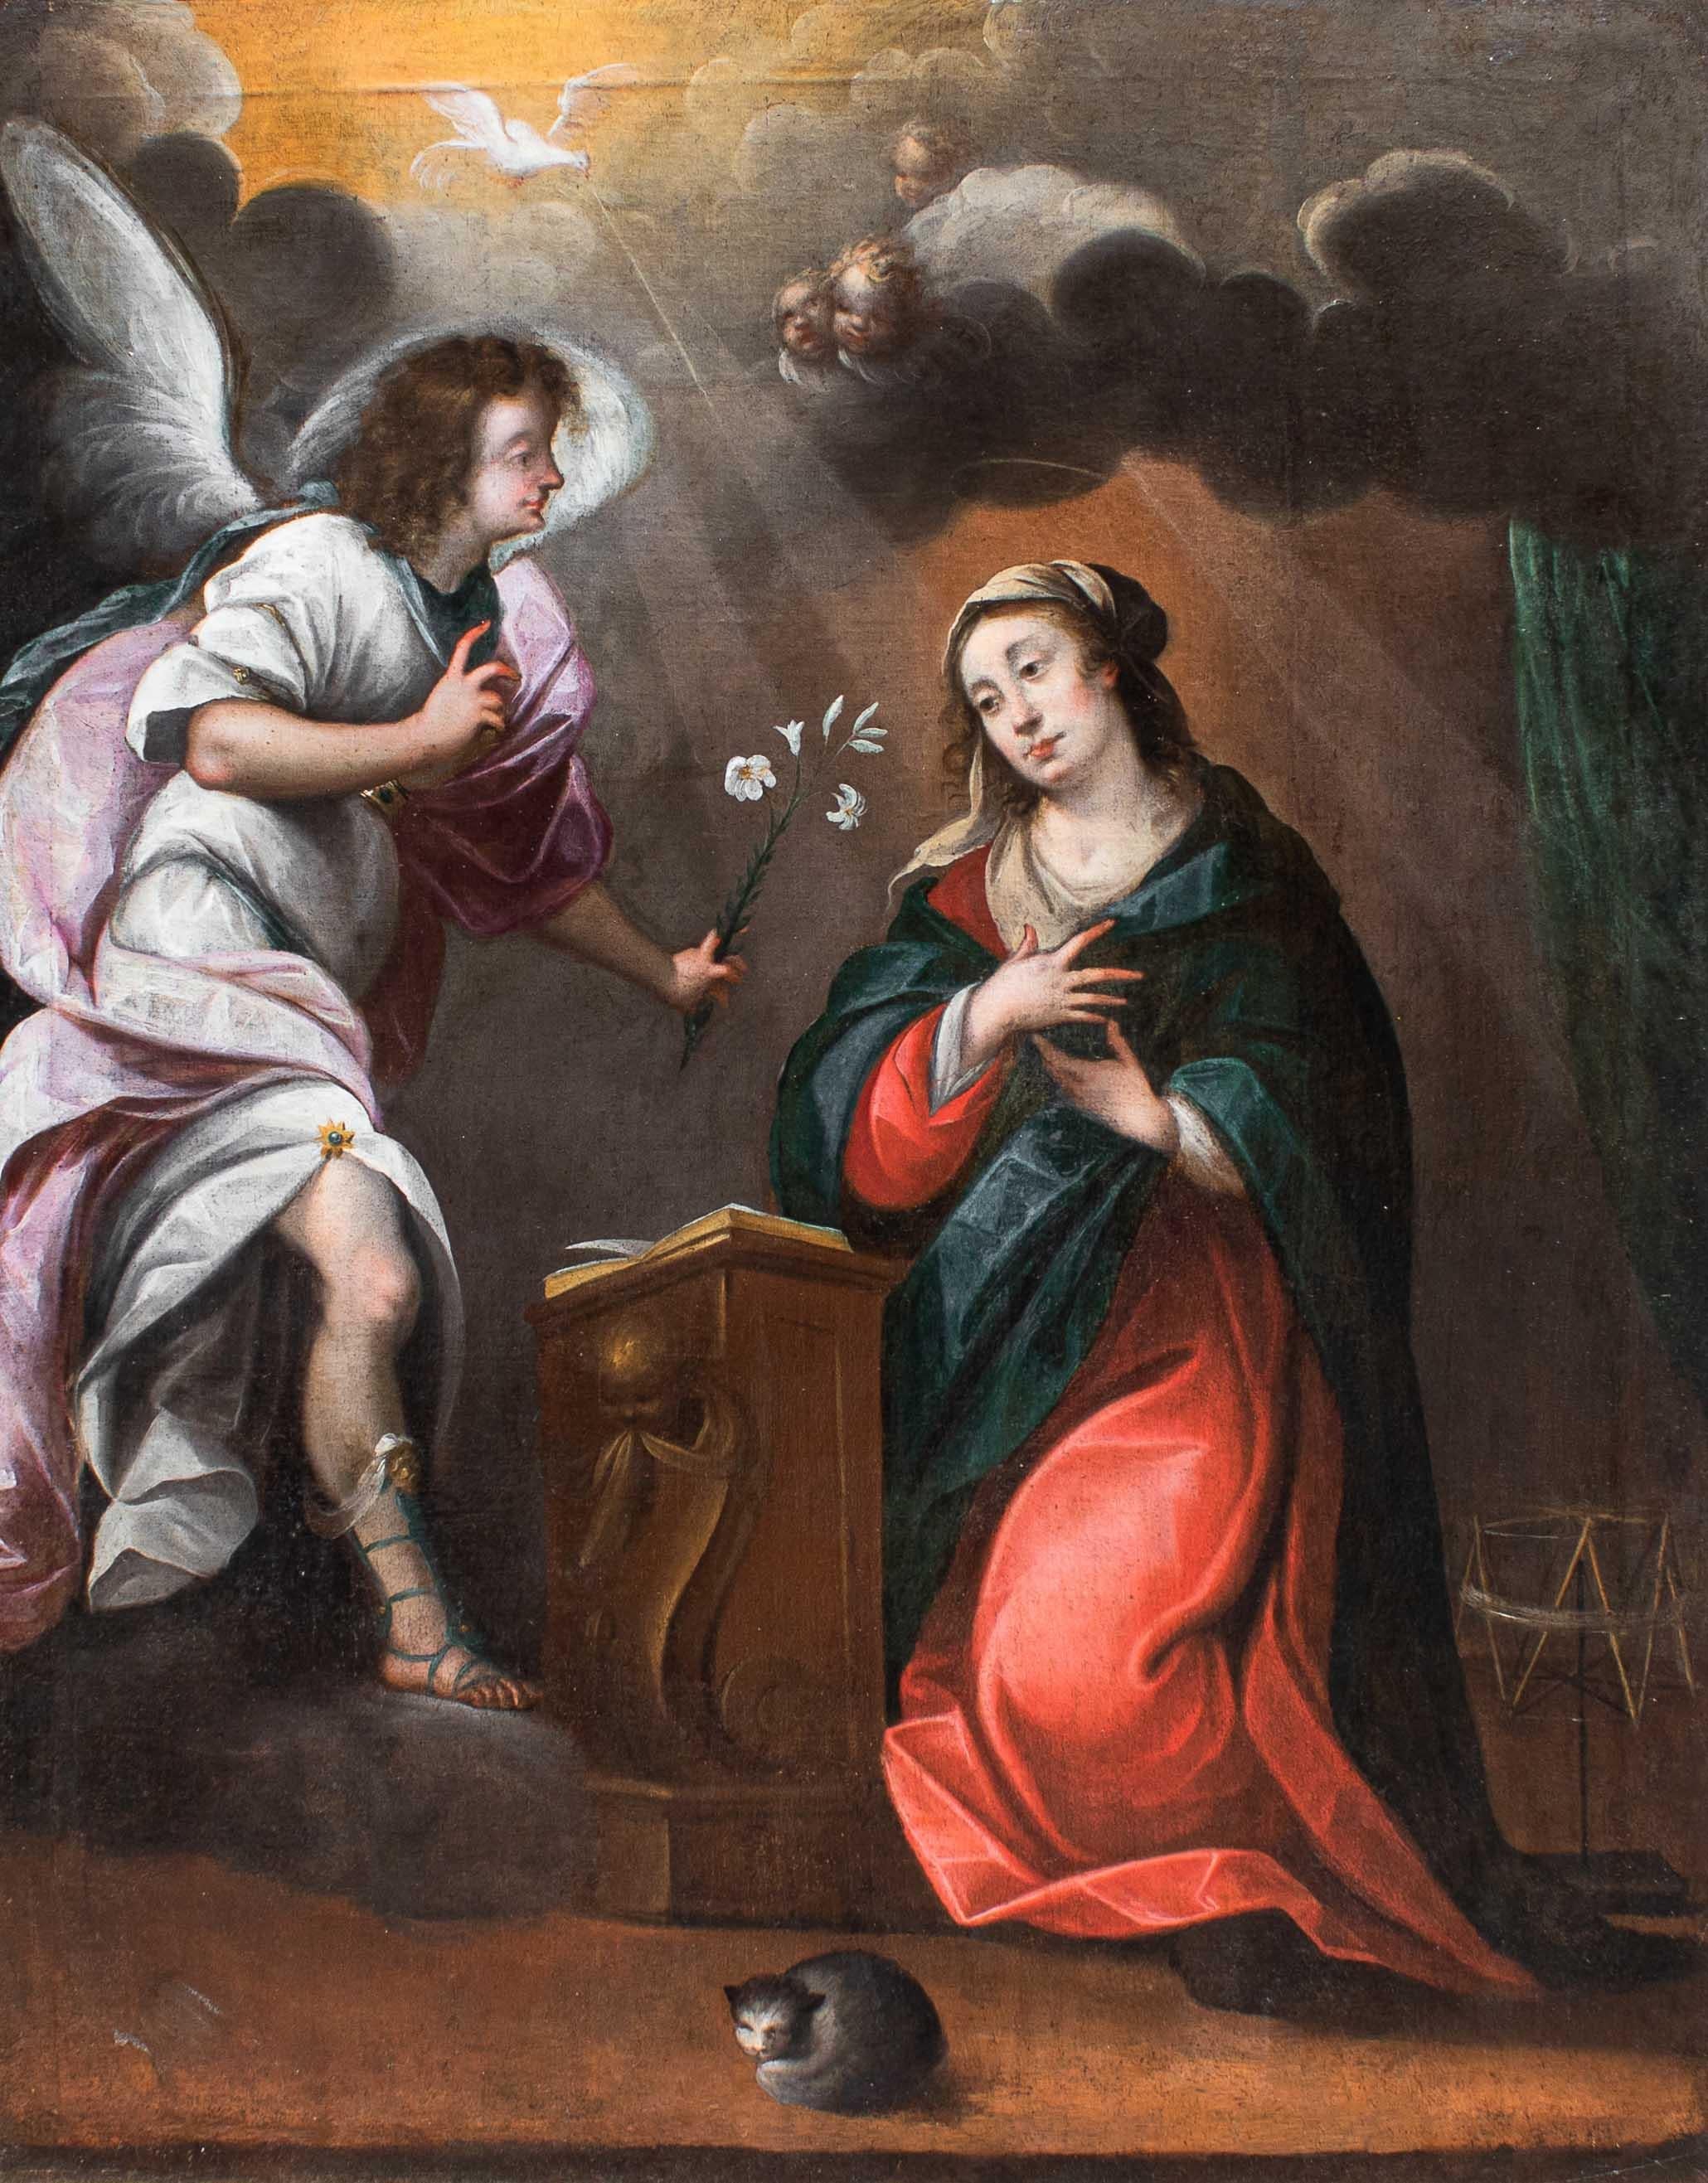 17th century, Nuvolone workshop
Annunciation
Measures: Oil on canvas, 98.50 x 127.00 cm - with frame 144 x 115

Depicted is a canonical Annunciation which sees Mary on her knees interrupted by the swirling arrival of the archangel Gabriel who